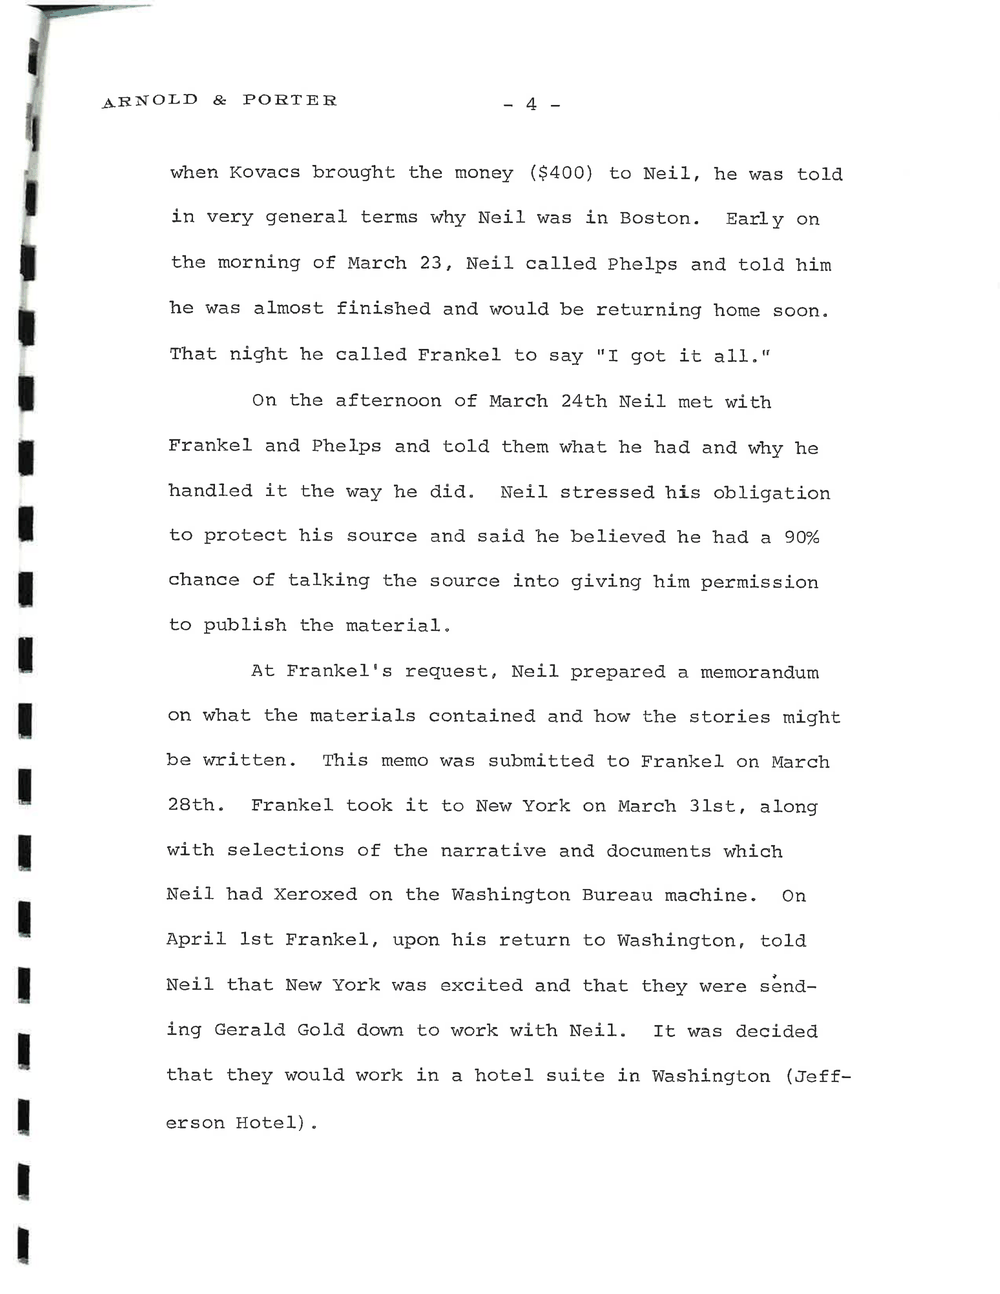 Page 4 from Rogovin Sheehan memo